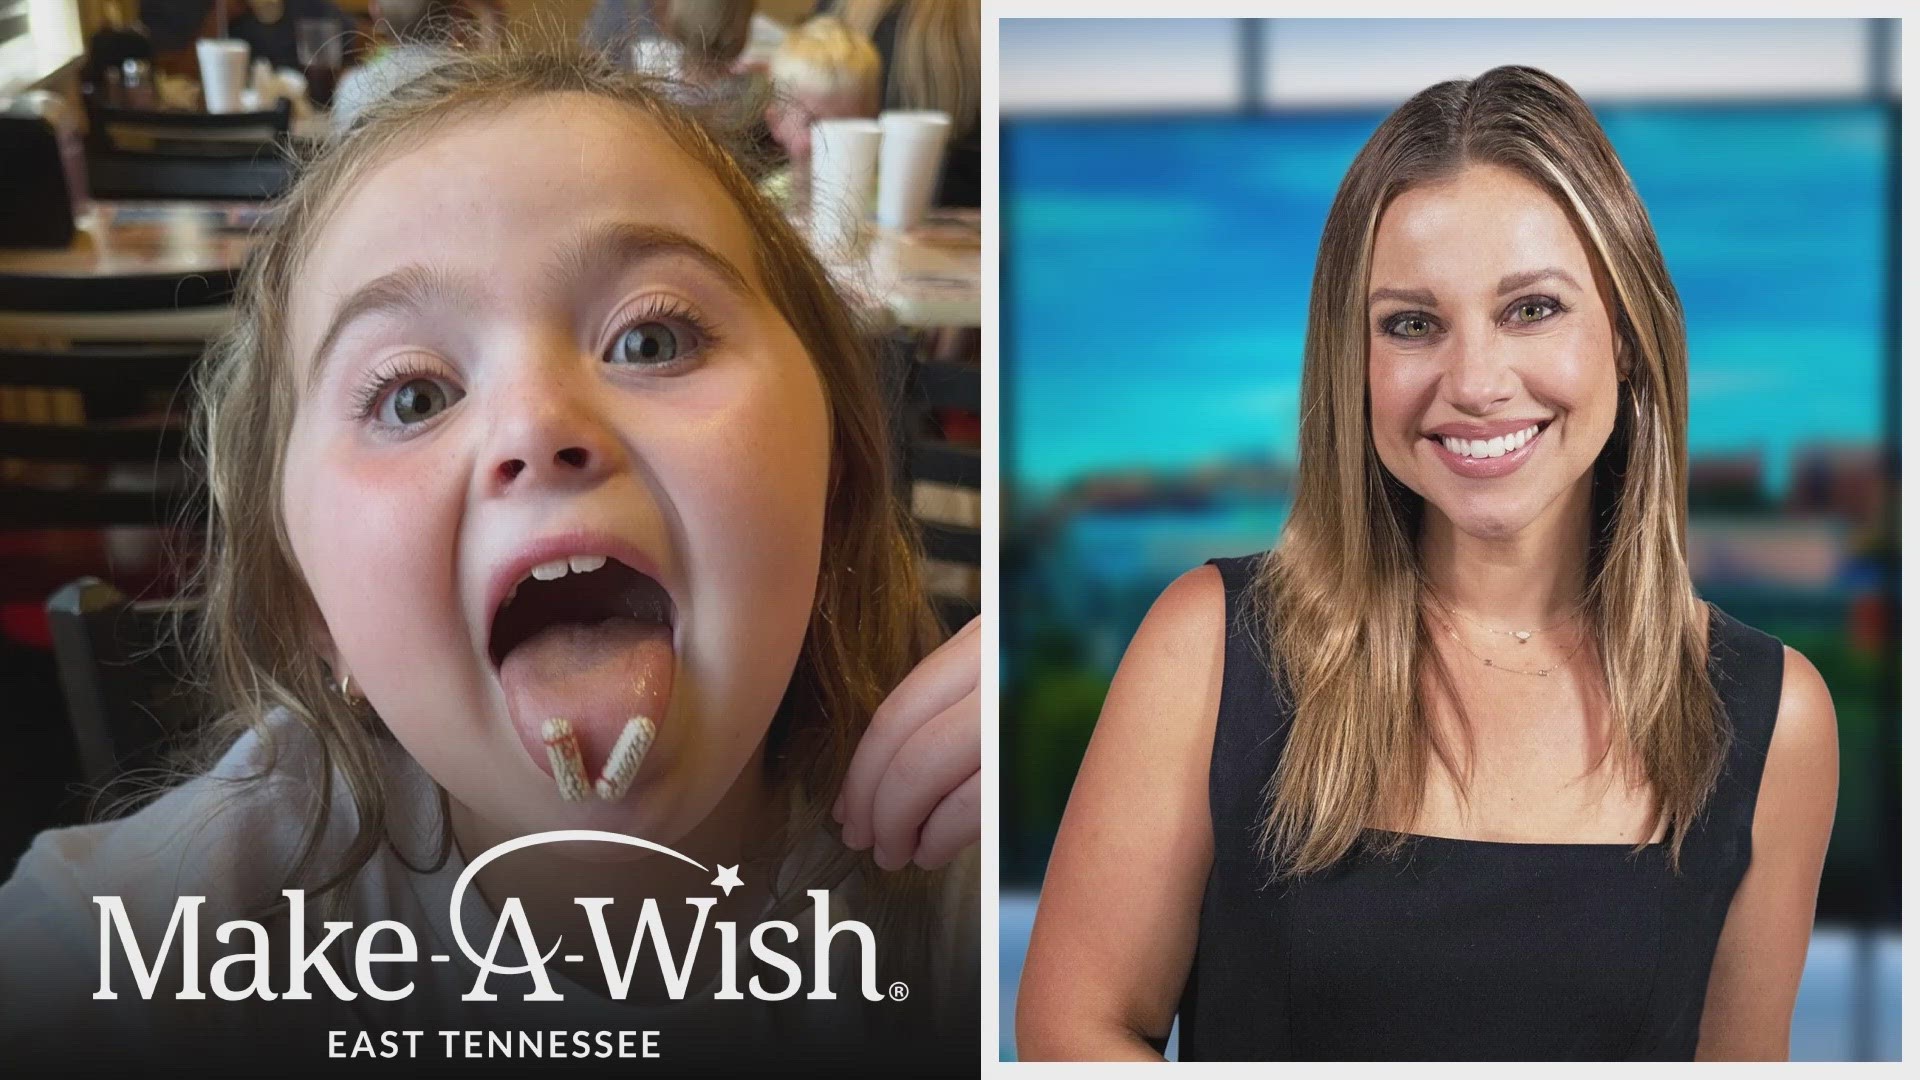 For the next six months, we are teaming up with children from Make-A-Wish East Tennessee to show you that they, too, have the hearts of a champion.